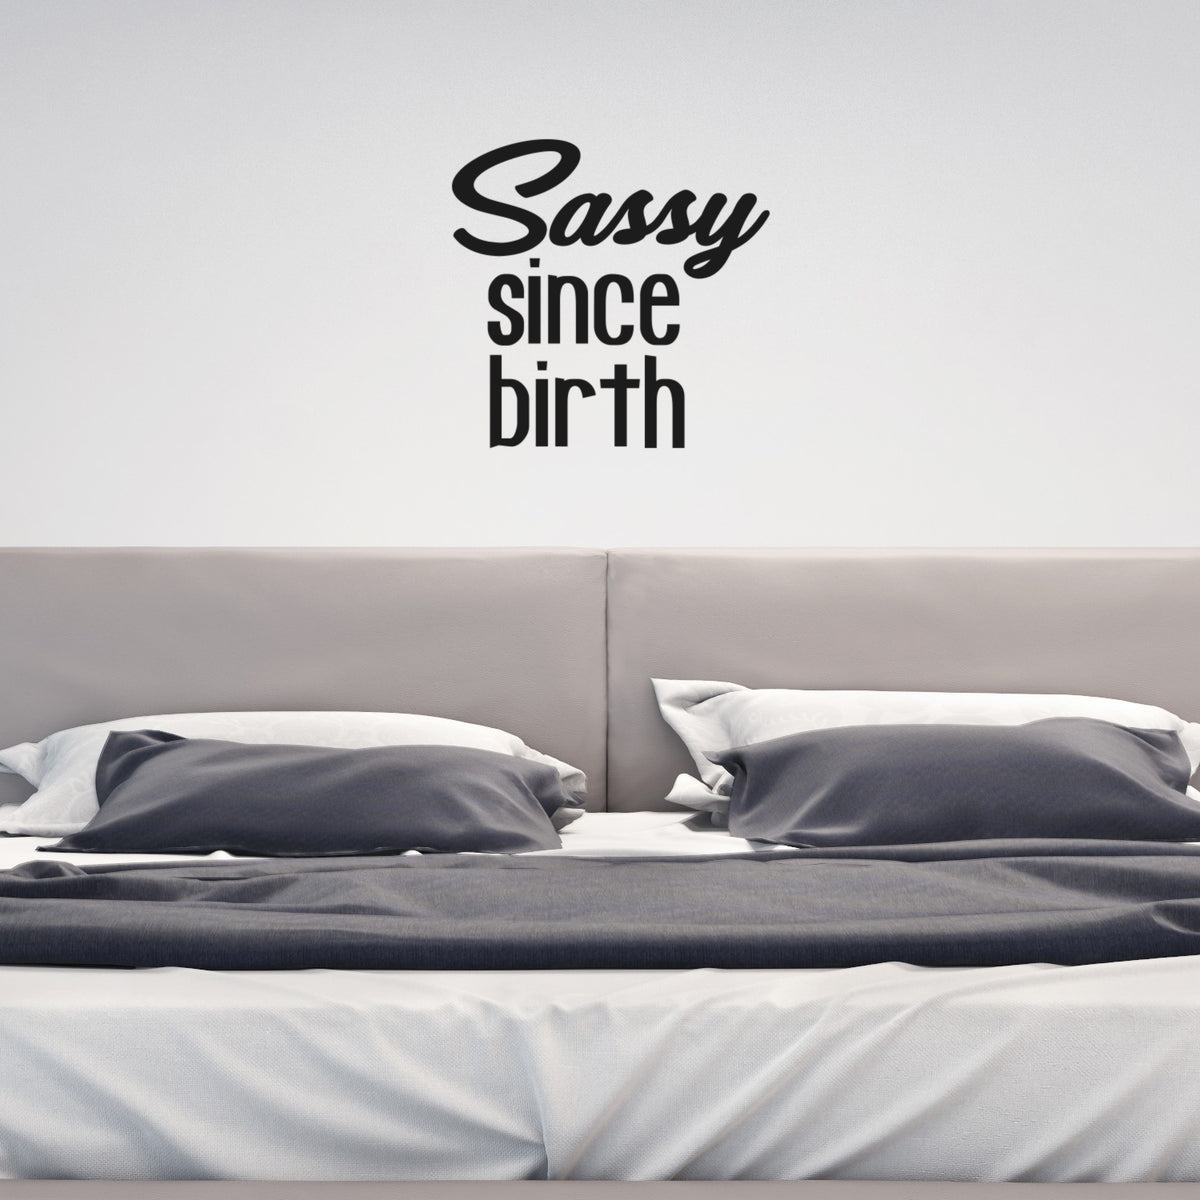 Sassy Since Birth - Inspirational Quotes Vinyl Wall Art Stickers - 20